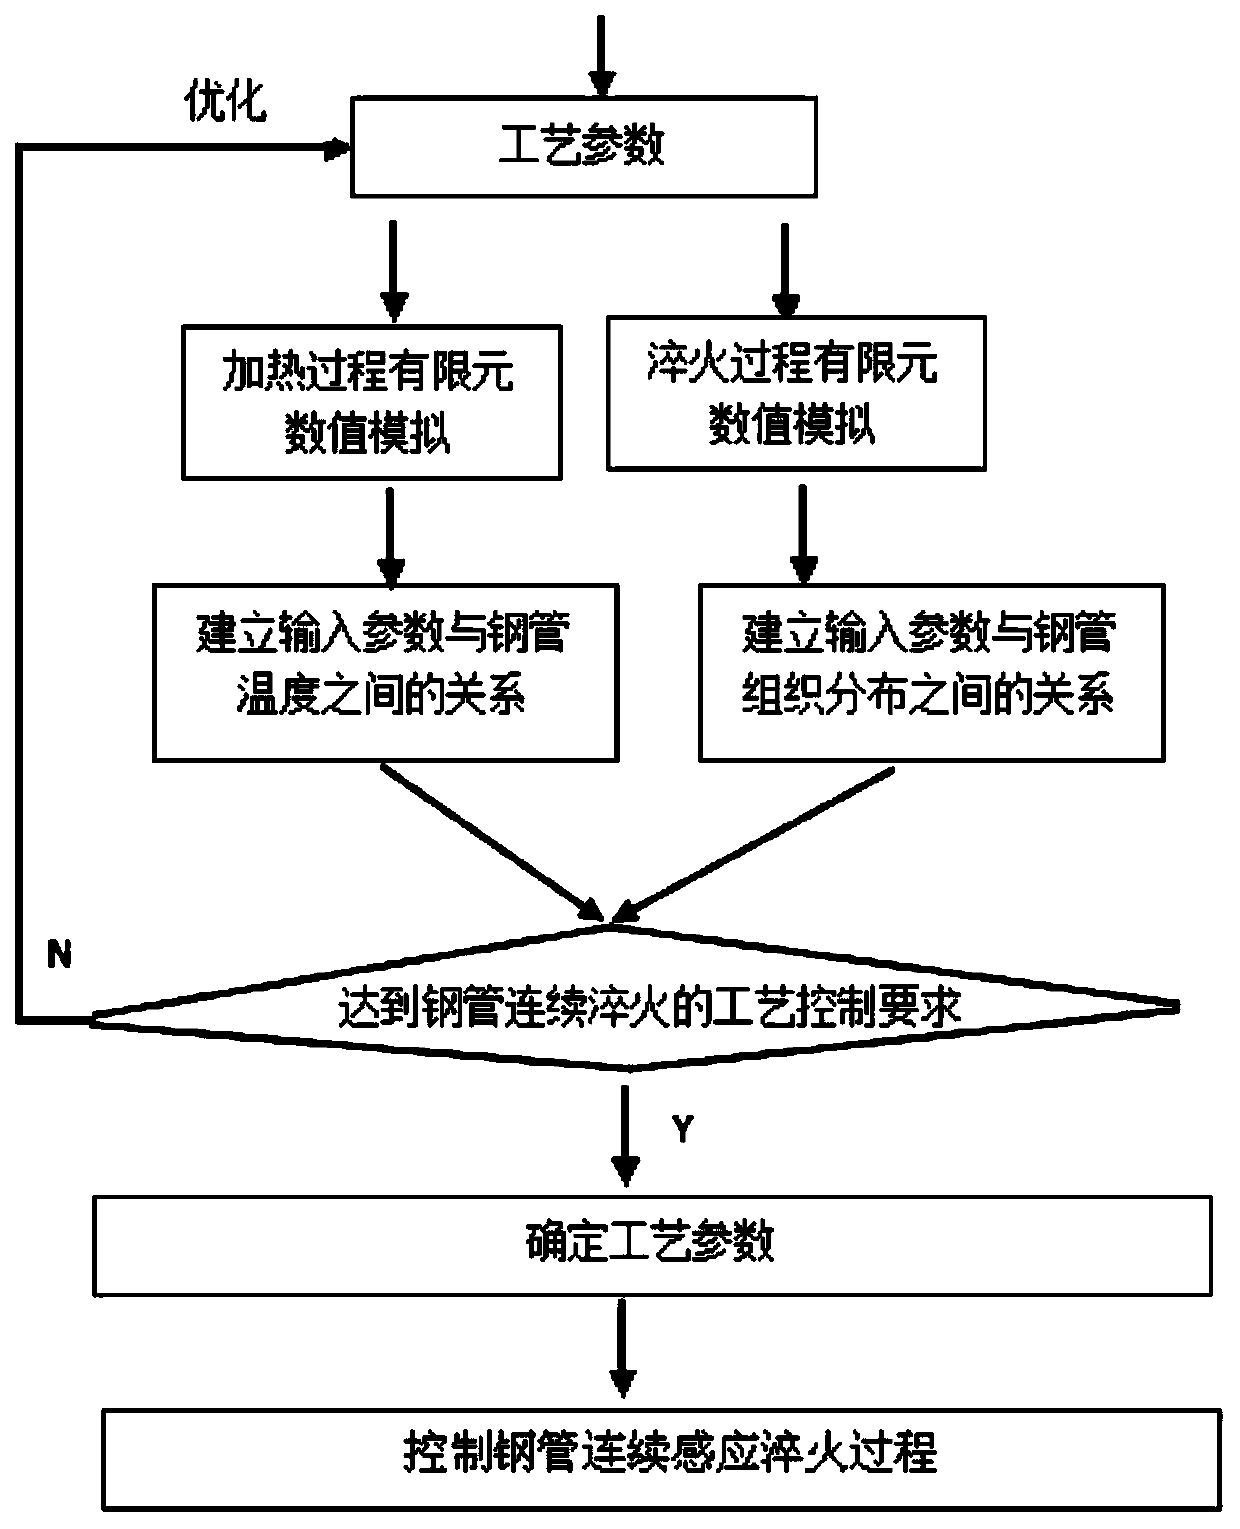 Steel pipe continuous quenching process control method based on numerical simulation